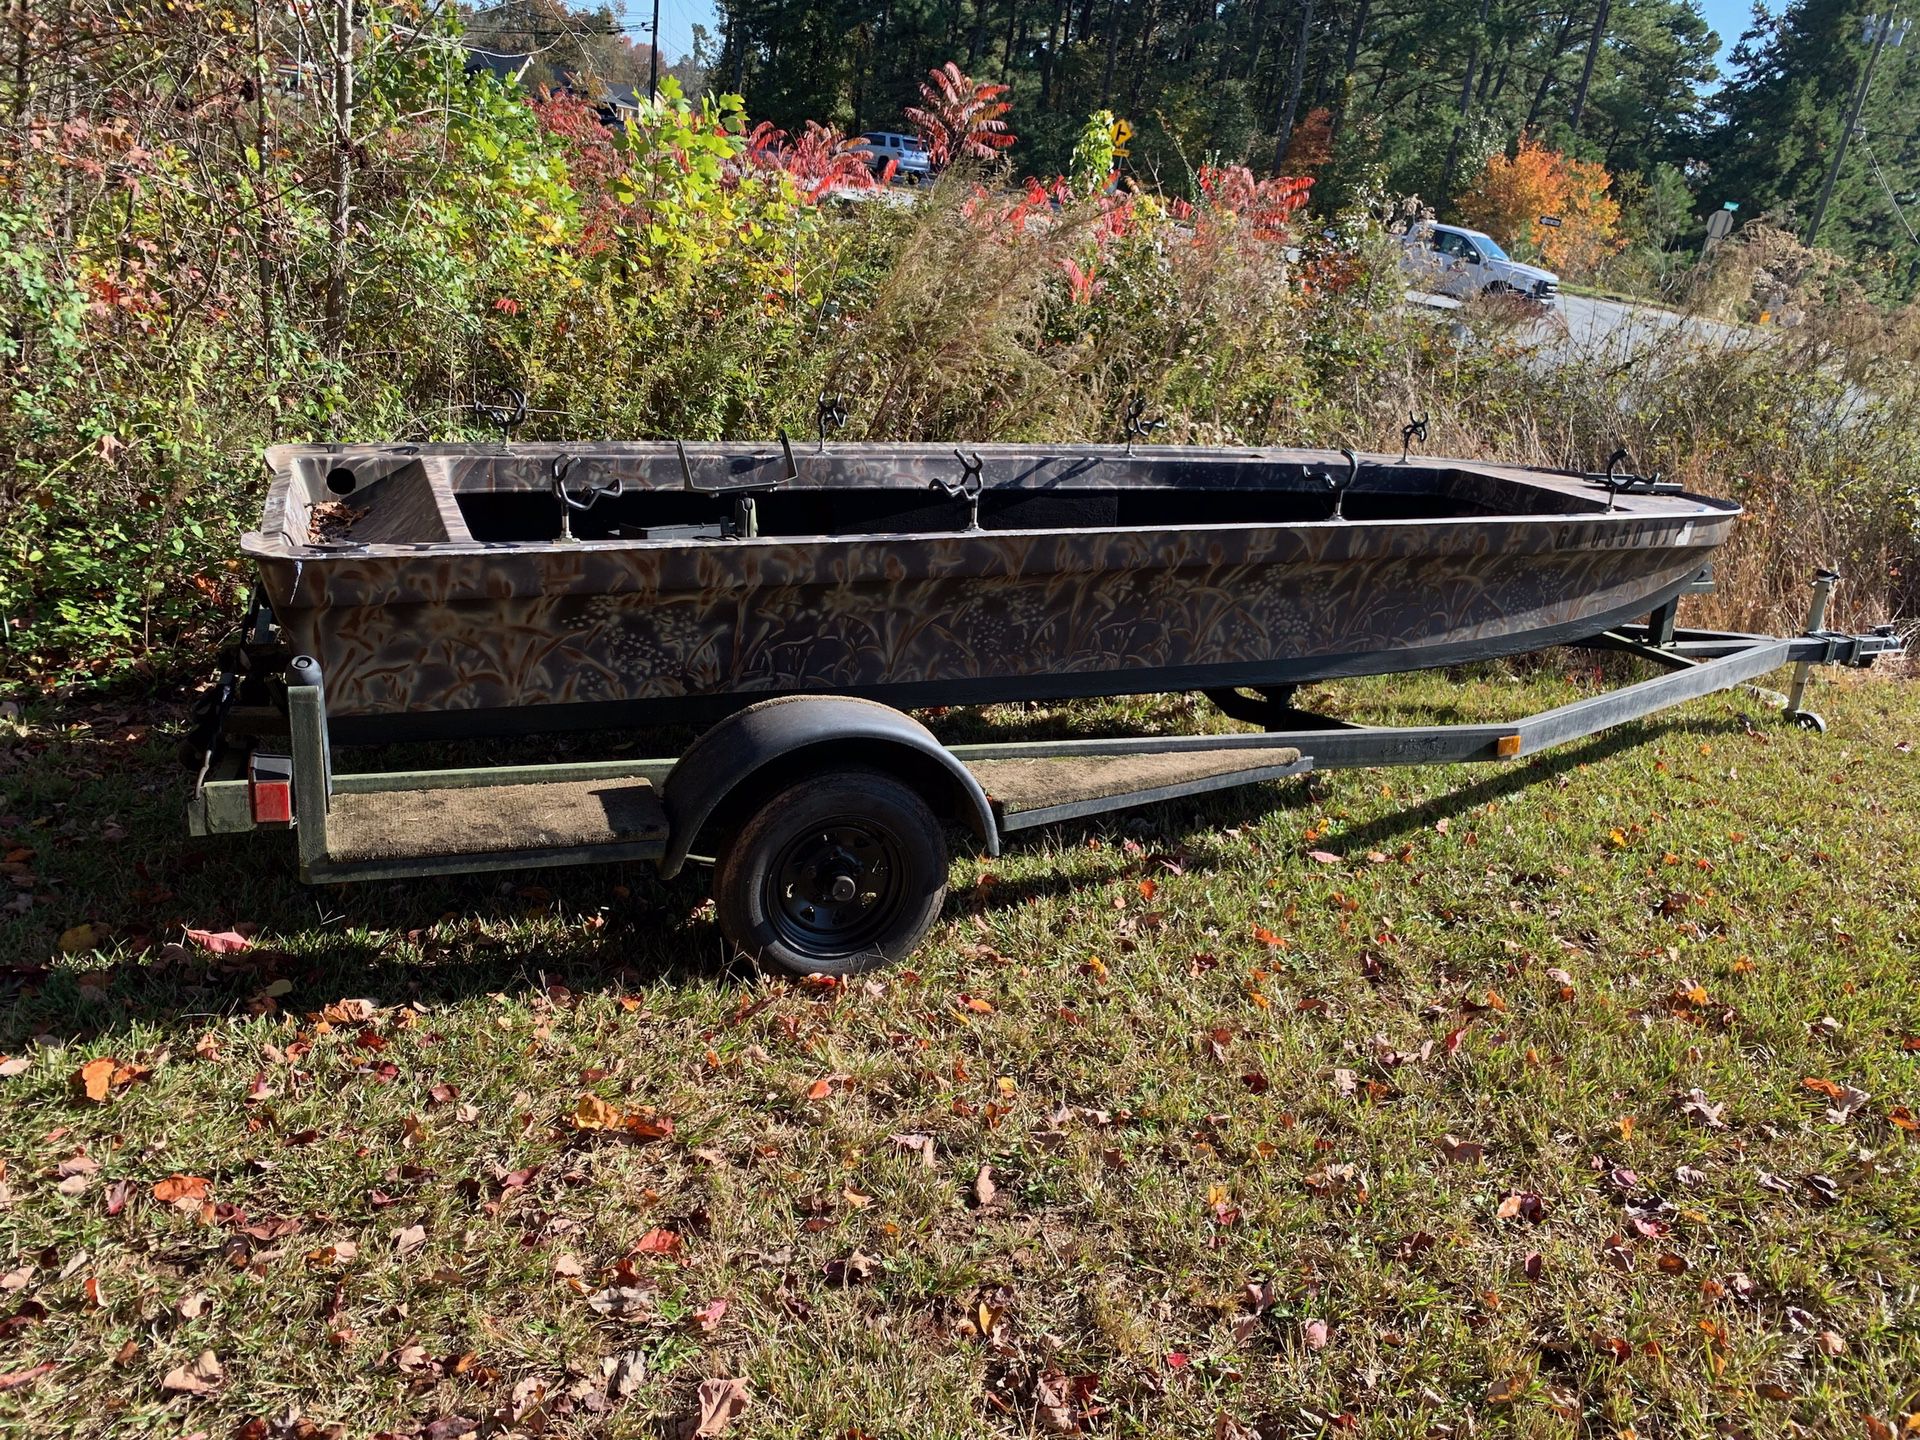 Boat 🚣‍♀️ with trailer for sale price is negotiable must pick up in Kennesaw off wade green road please serious buyers only